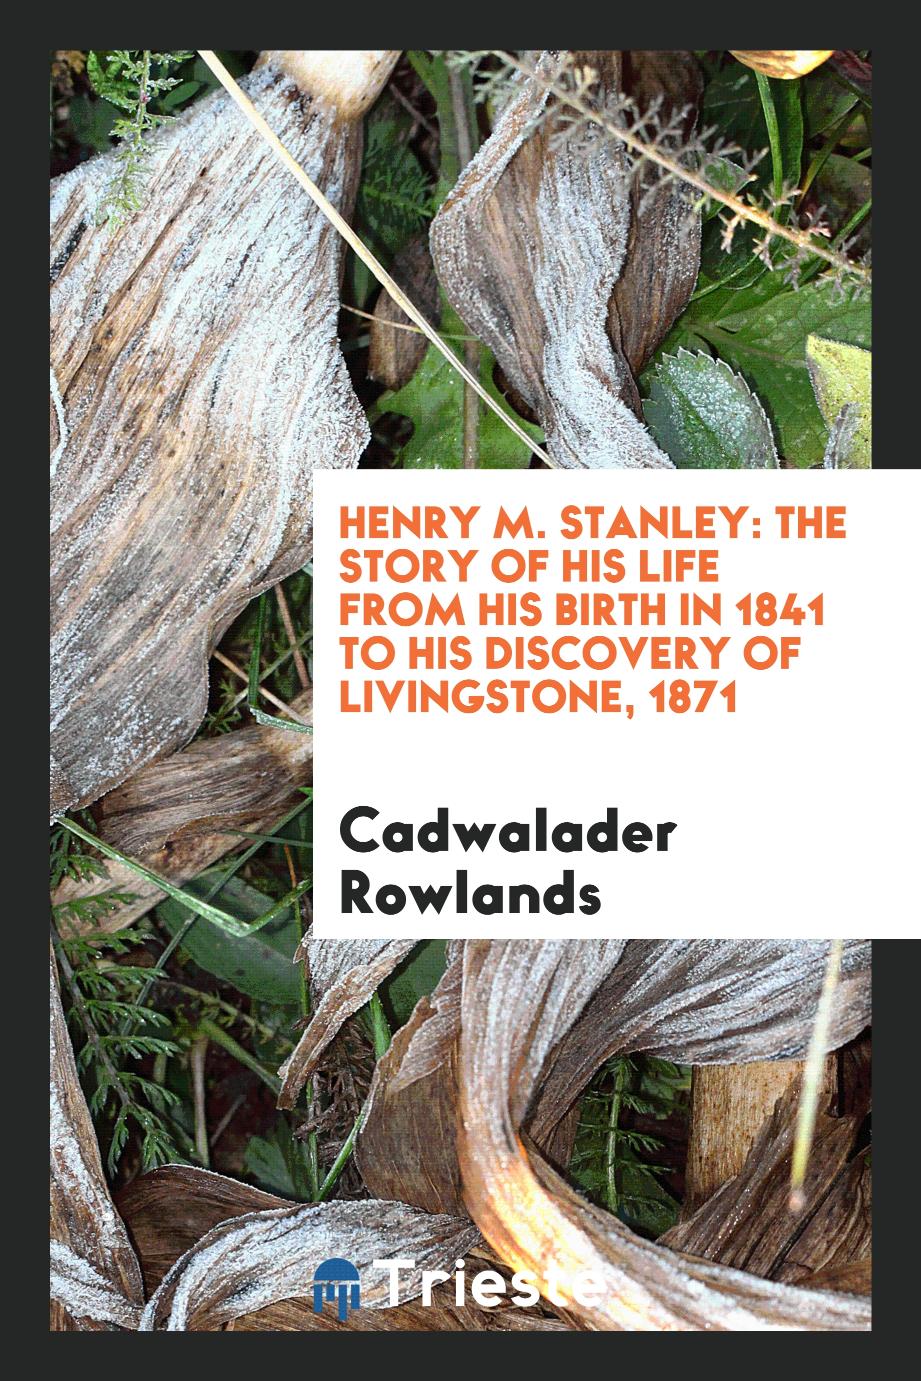 Henry M. Stanley: the story of his life from his birth in 1841 to his discovery of Livingstone, 1871